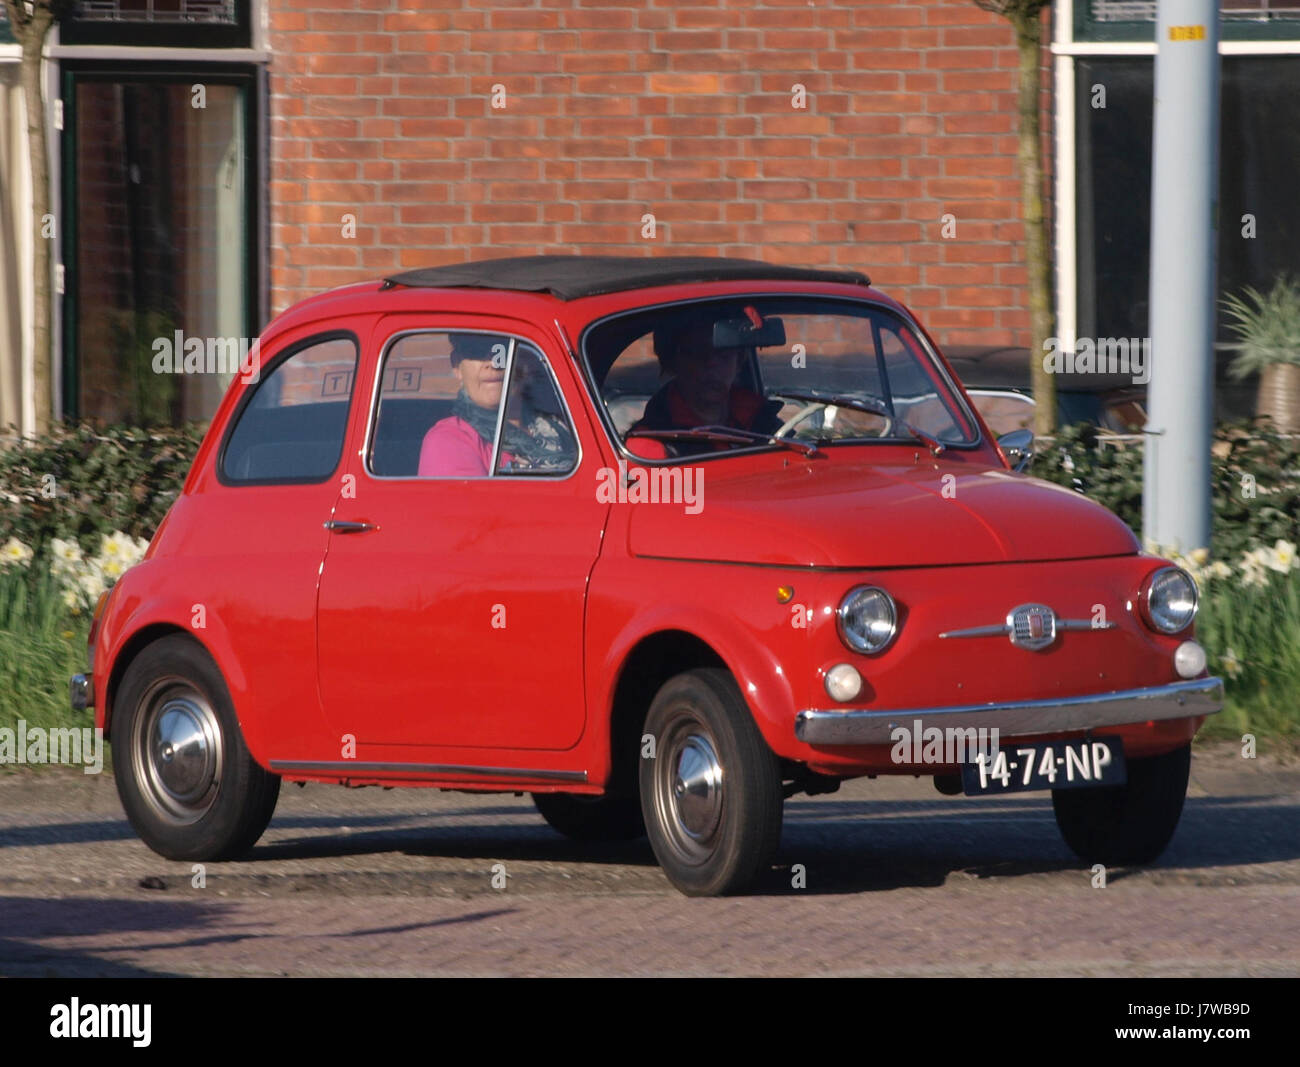 1970 Fiat , Dutch licence registration 14 74 NP, pic2 Stock Photo